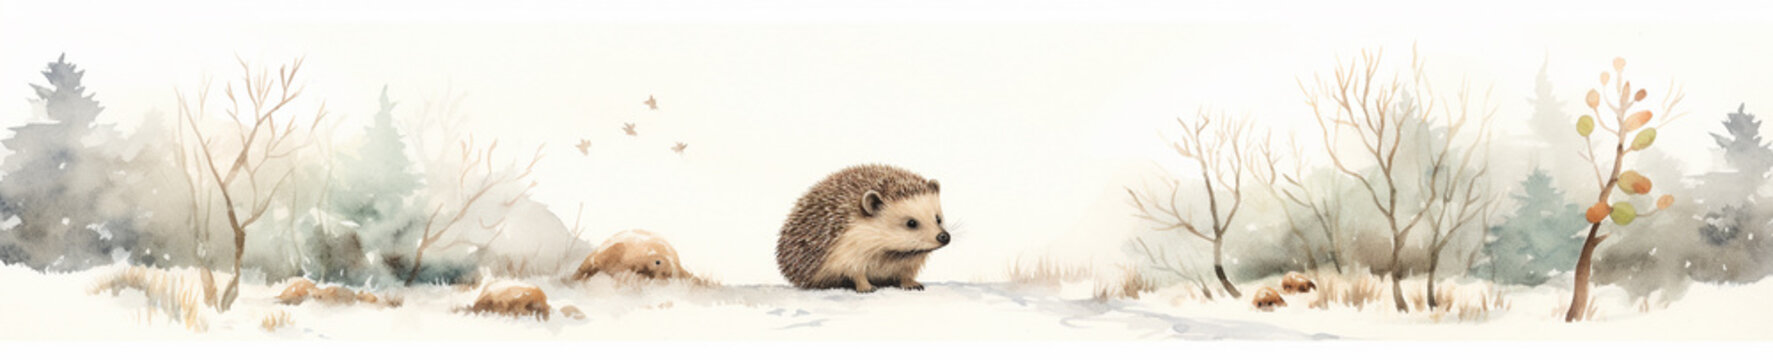 A Minimal Watercolor Banner of a Hedgehog in a Winter Setting